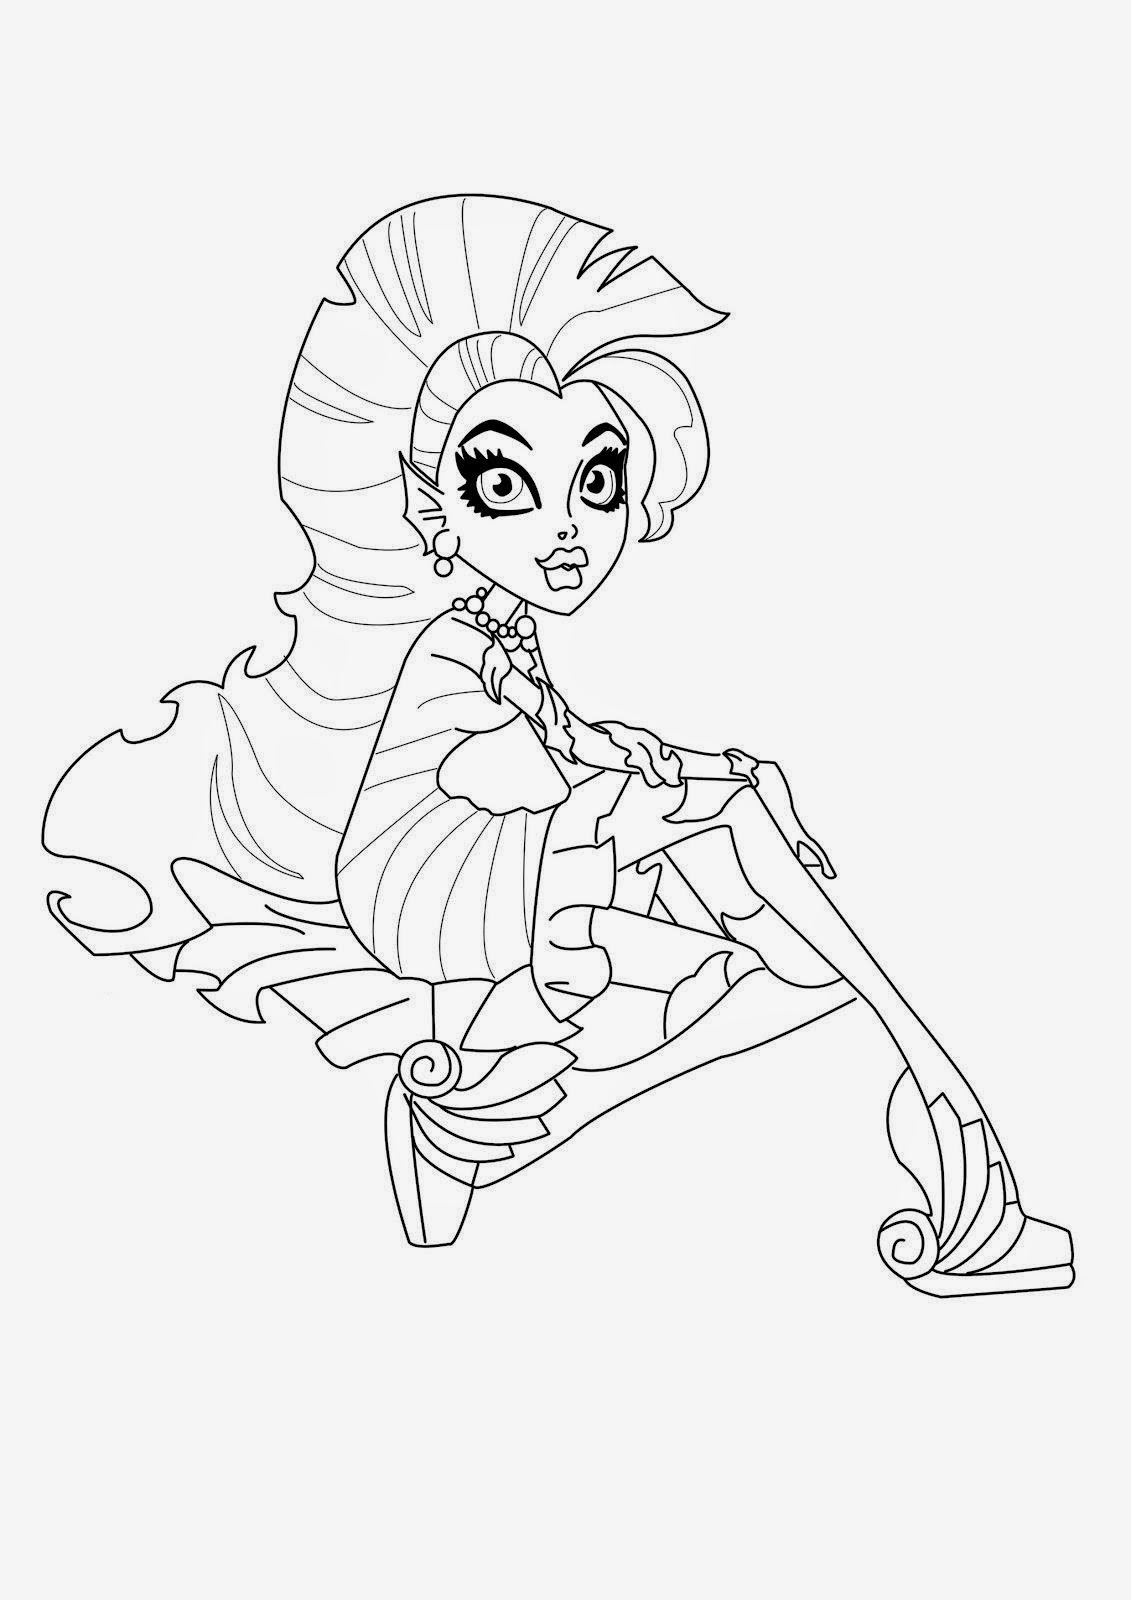 Download Coloring Pages: Monster High Coloring Pages Free and Printable